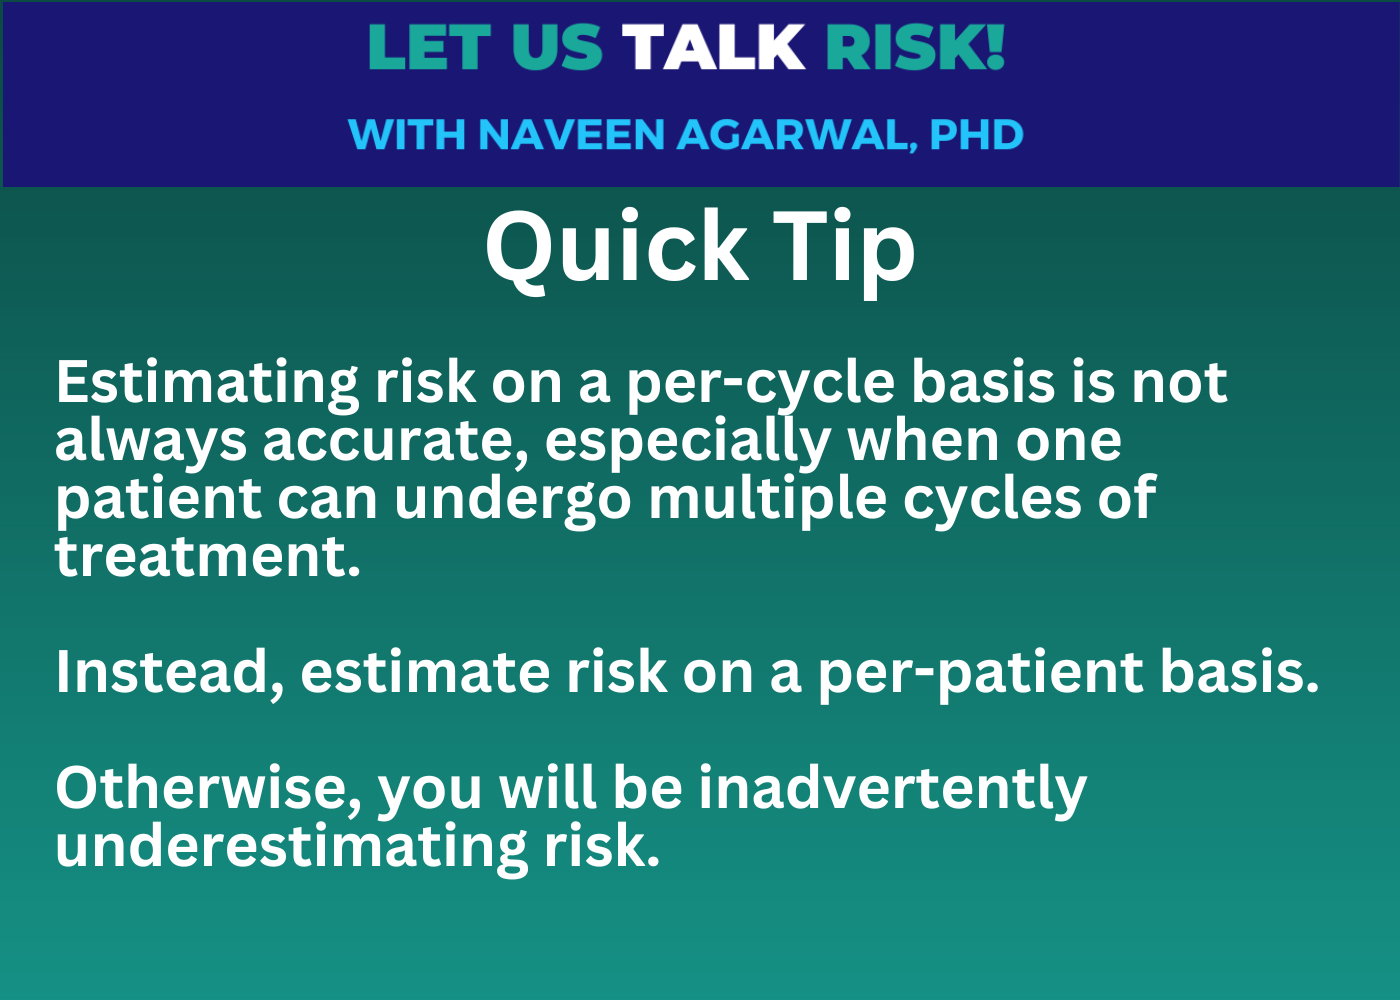 Quick Tip - estimate risk on a per-patient basis not per-cycle basis